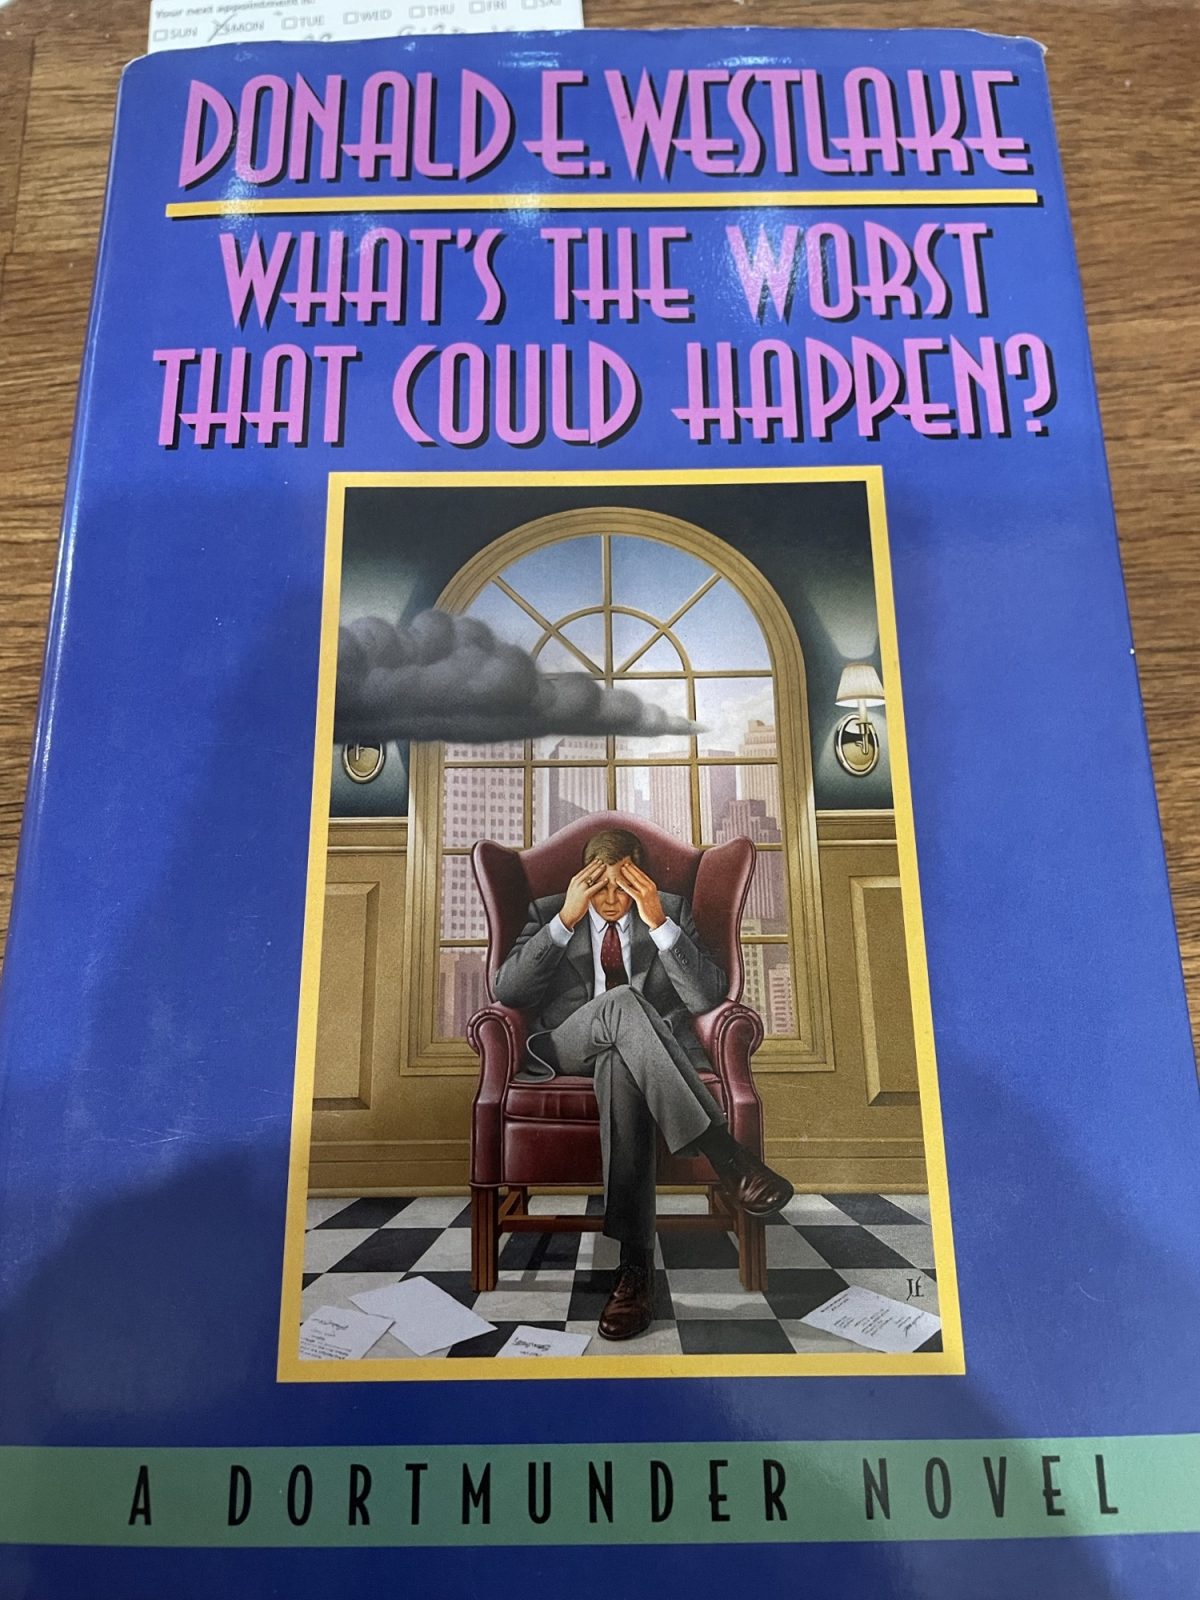 What’s the Worst That Could Happen? – Movie and Book